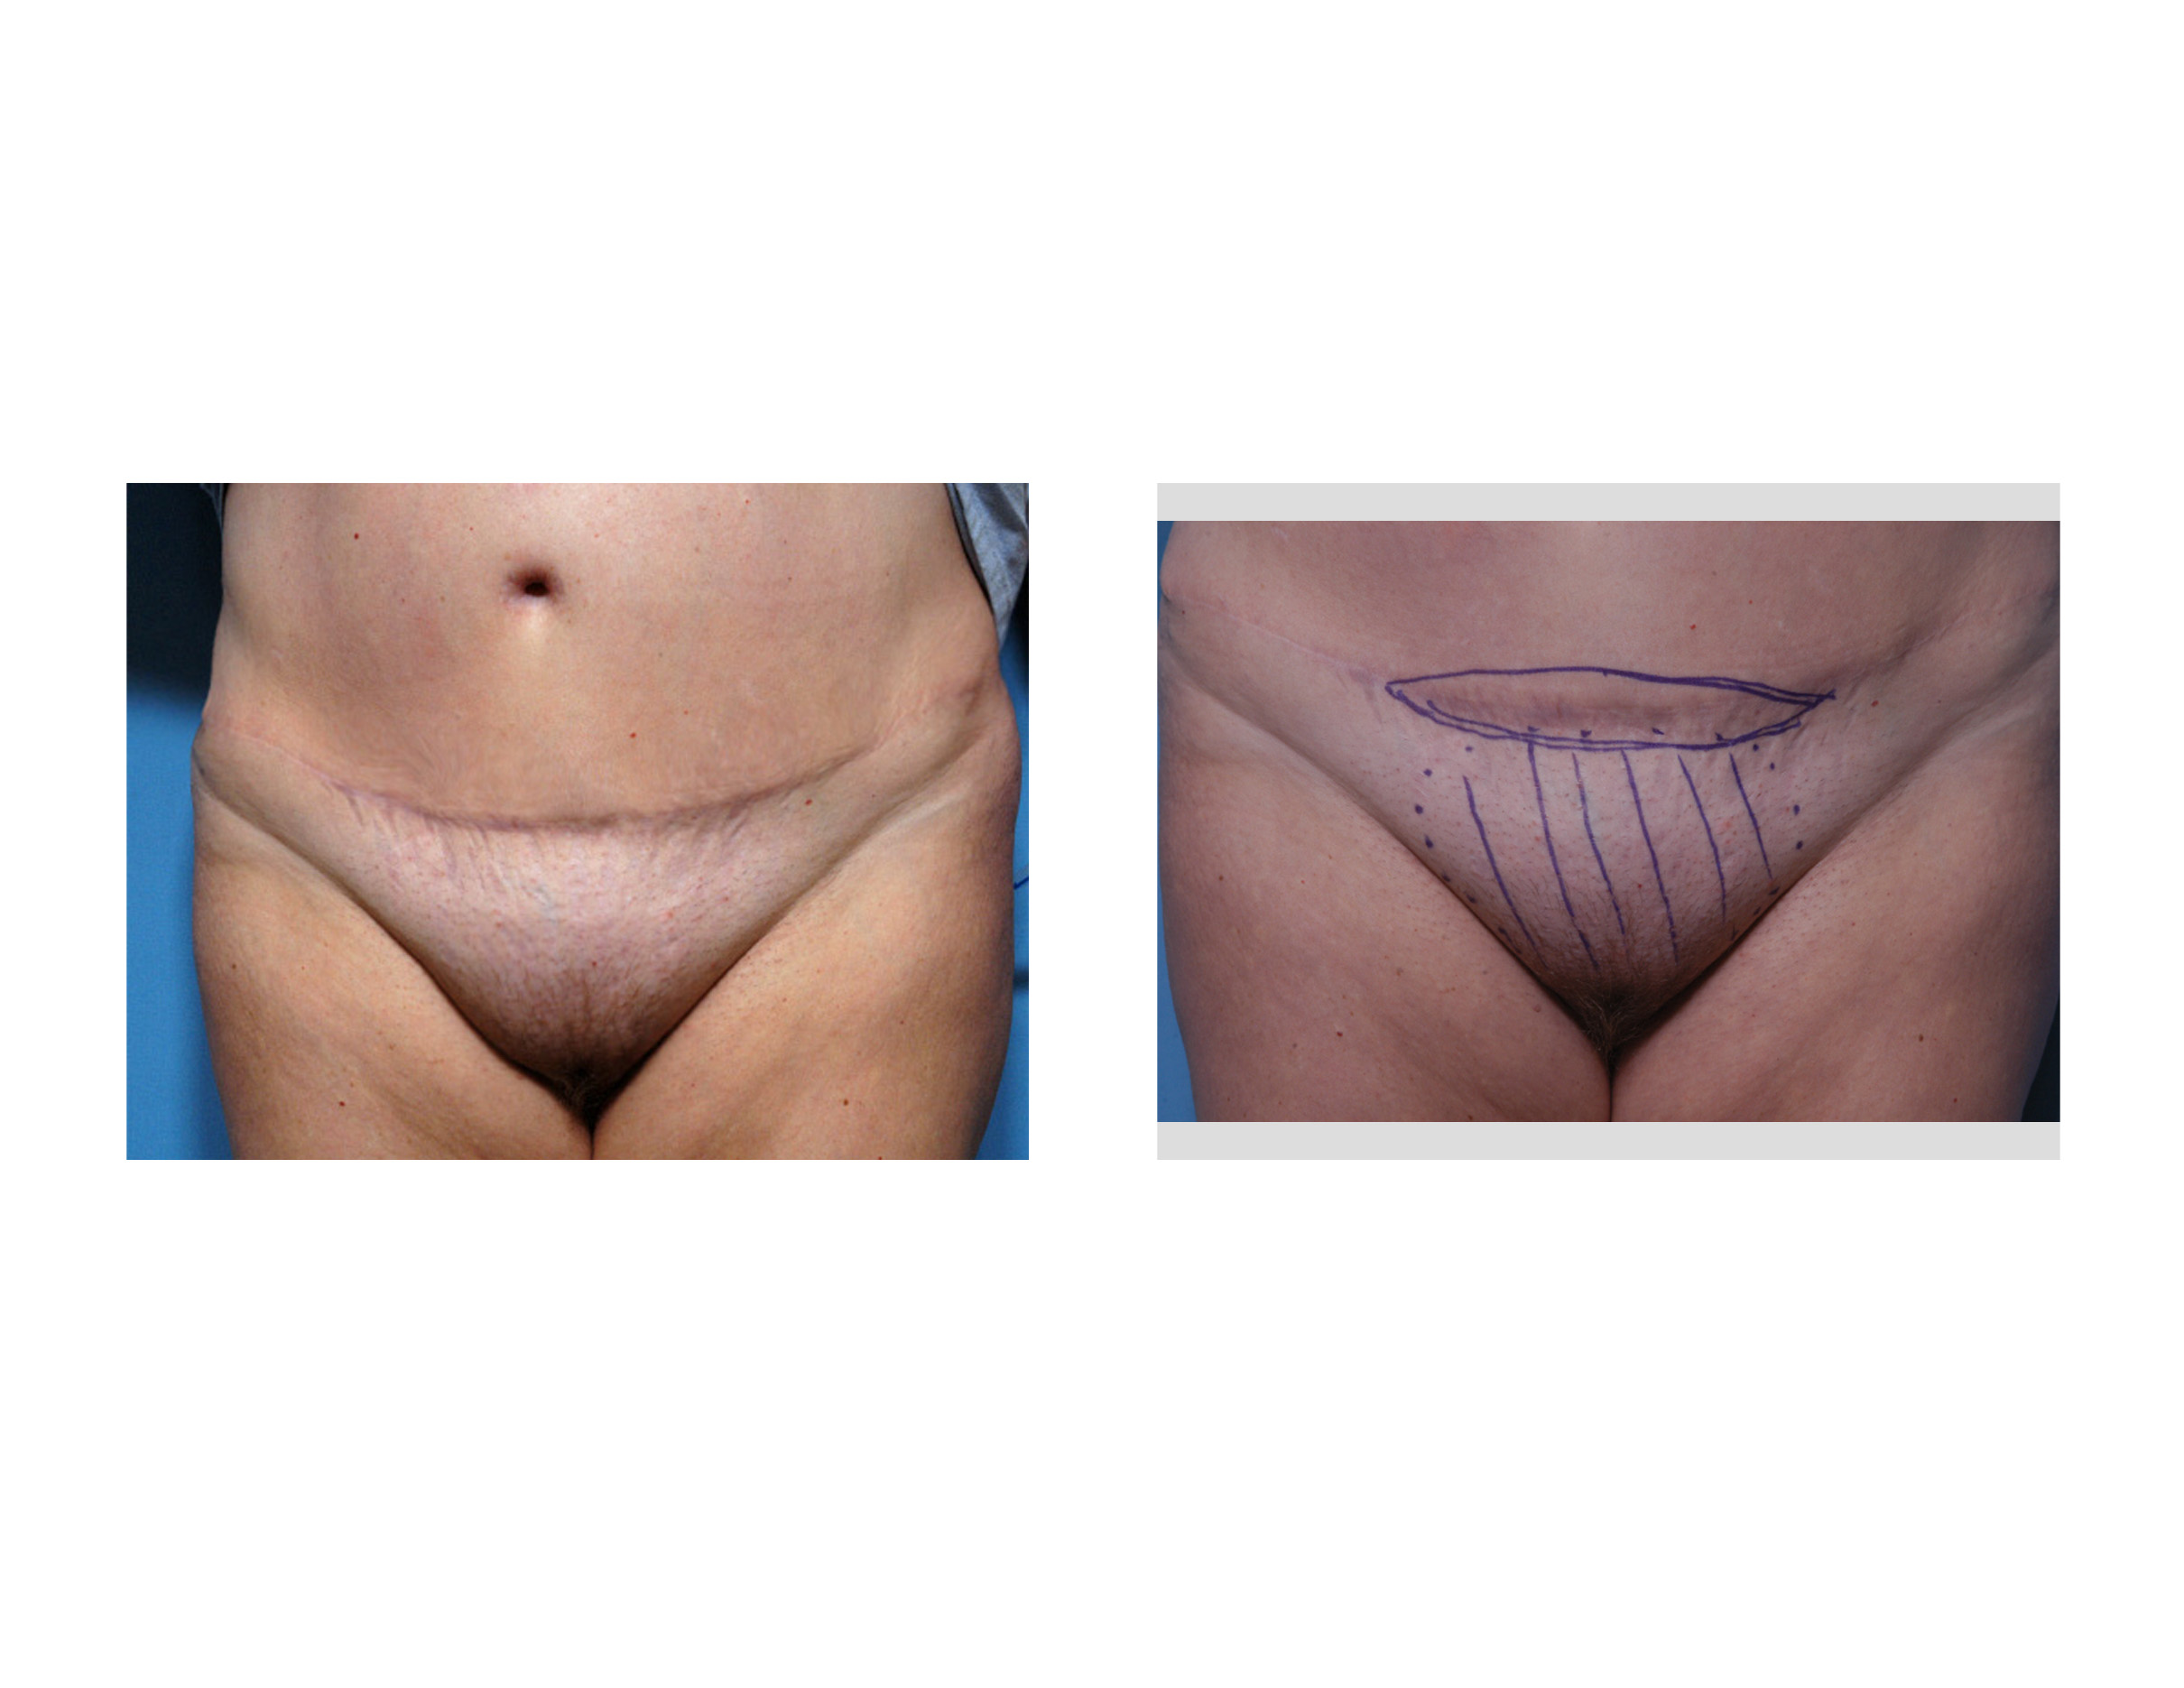 Case Study: Tummy Tuck Surgery and the Potential Need for Revision